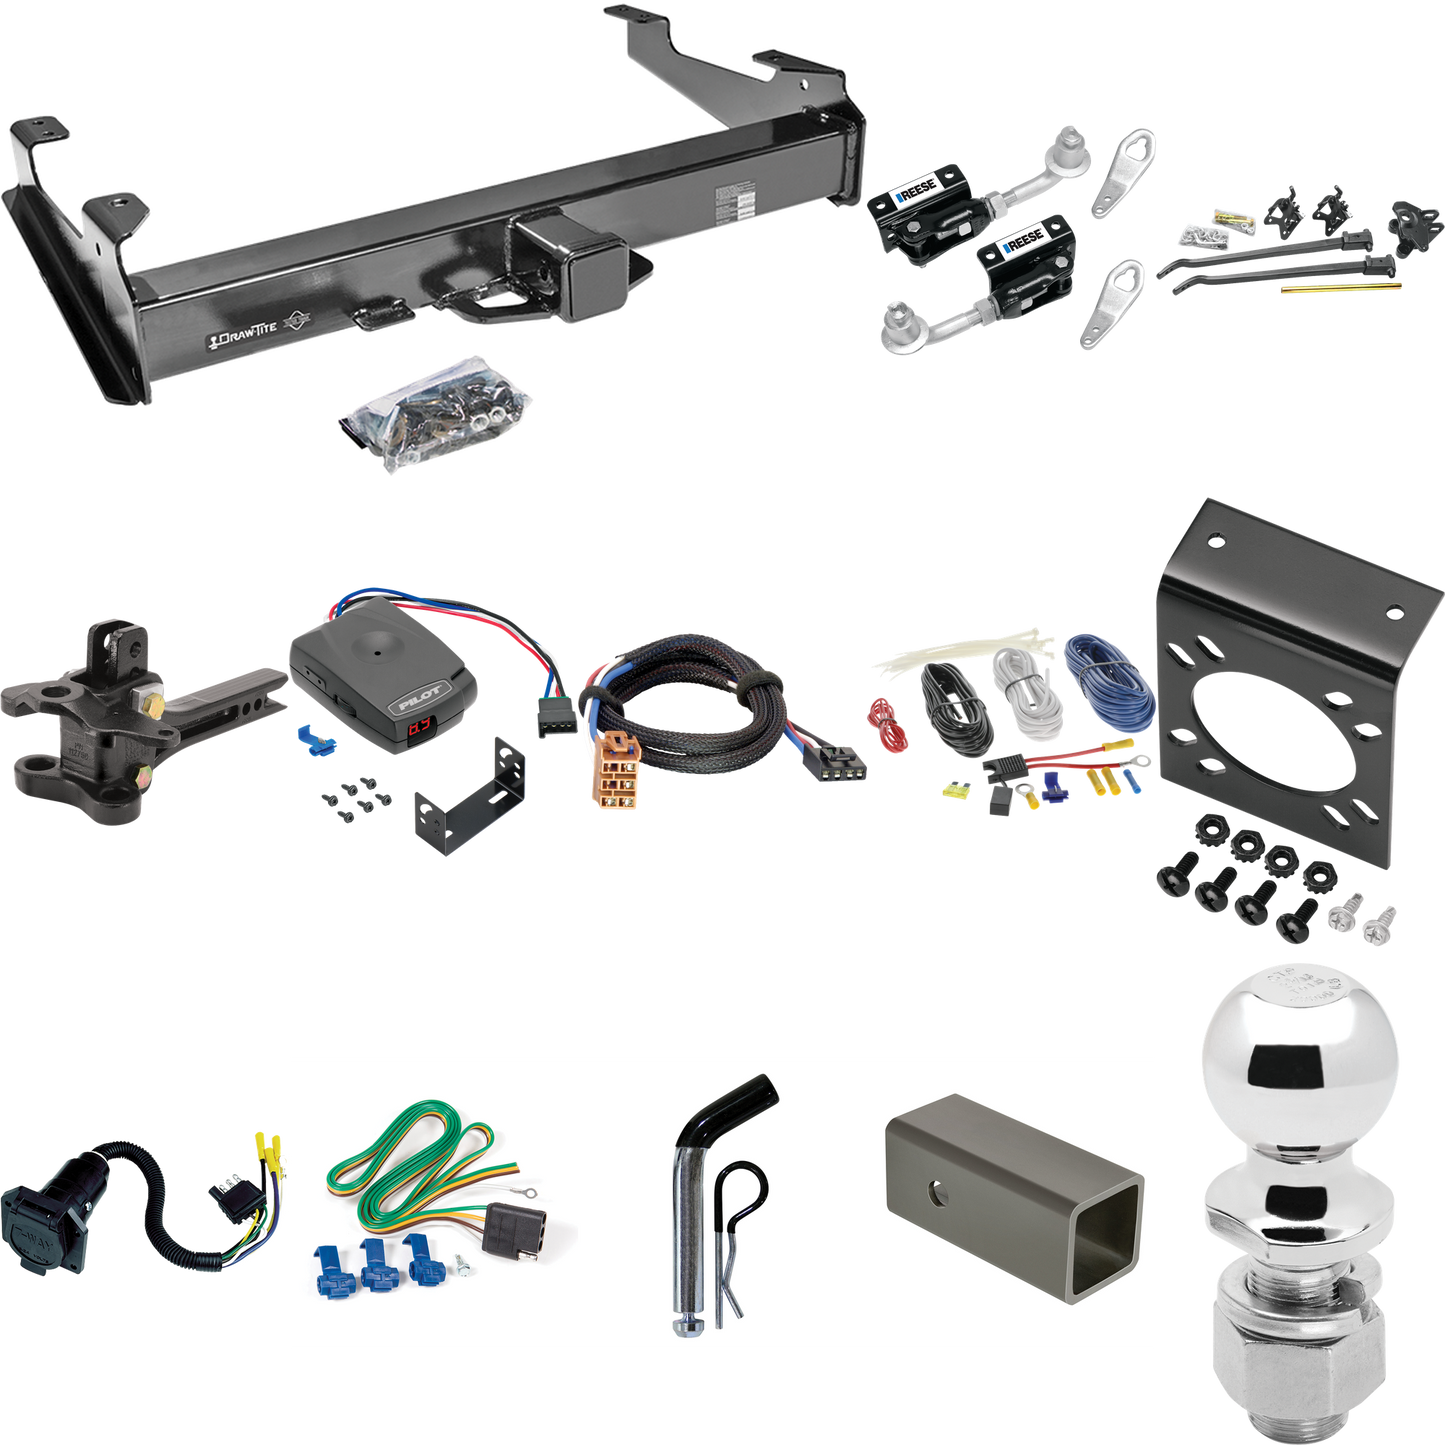 Fits 2001-2002 Chevrolet Silverado 2500 HD Trailer Hitch Tow PKG w/ 17K Trunnion Bar Weight Distribution Hitch + Pin/Clip + Dual Cam Sway Control + 2-5/16" Ball + Pro Series Pilot Brake Control + Plug & Play BC Adapter + 7-Way RV Wiring (For 8 ft. Be